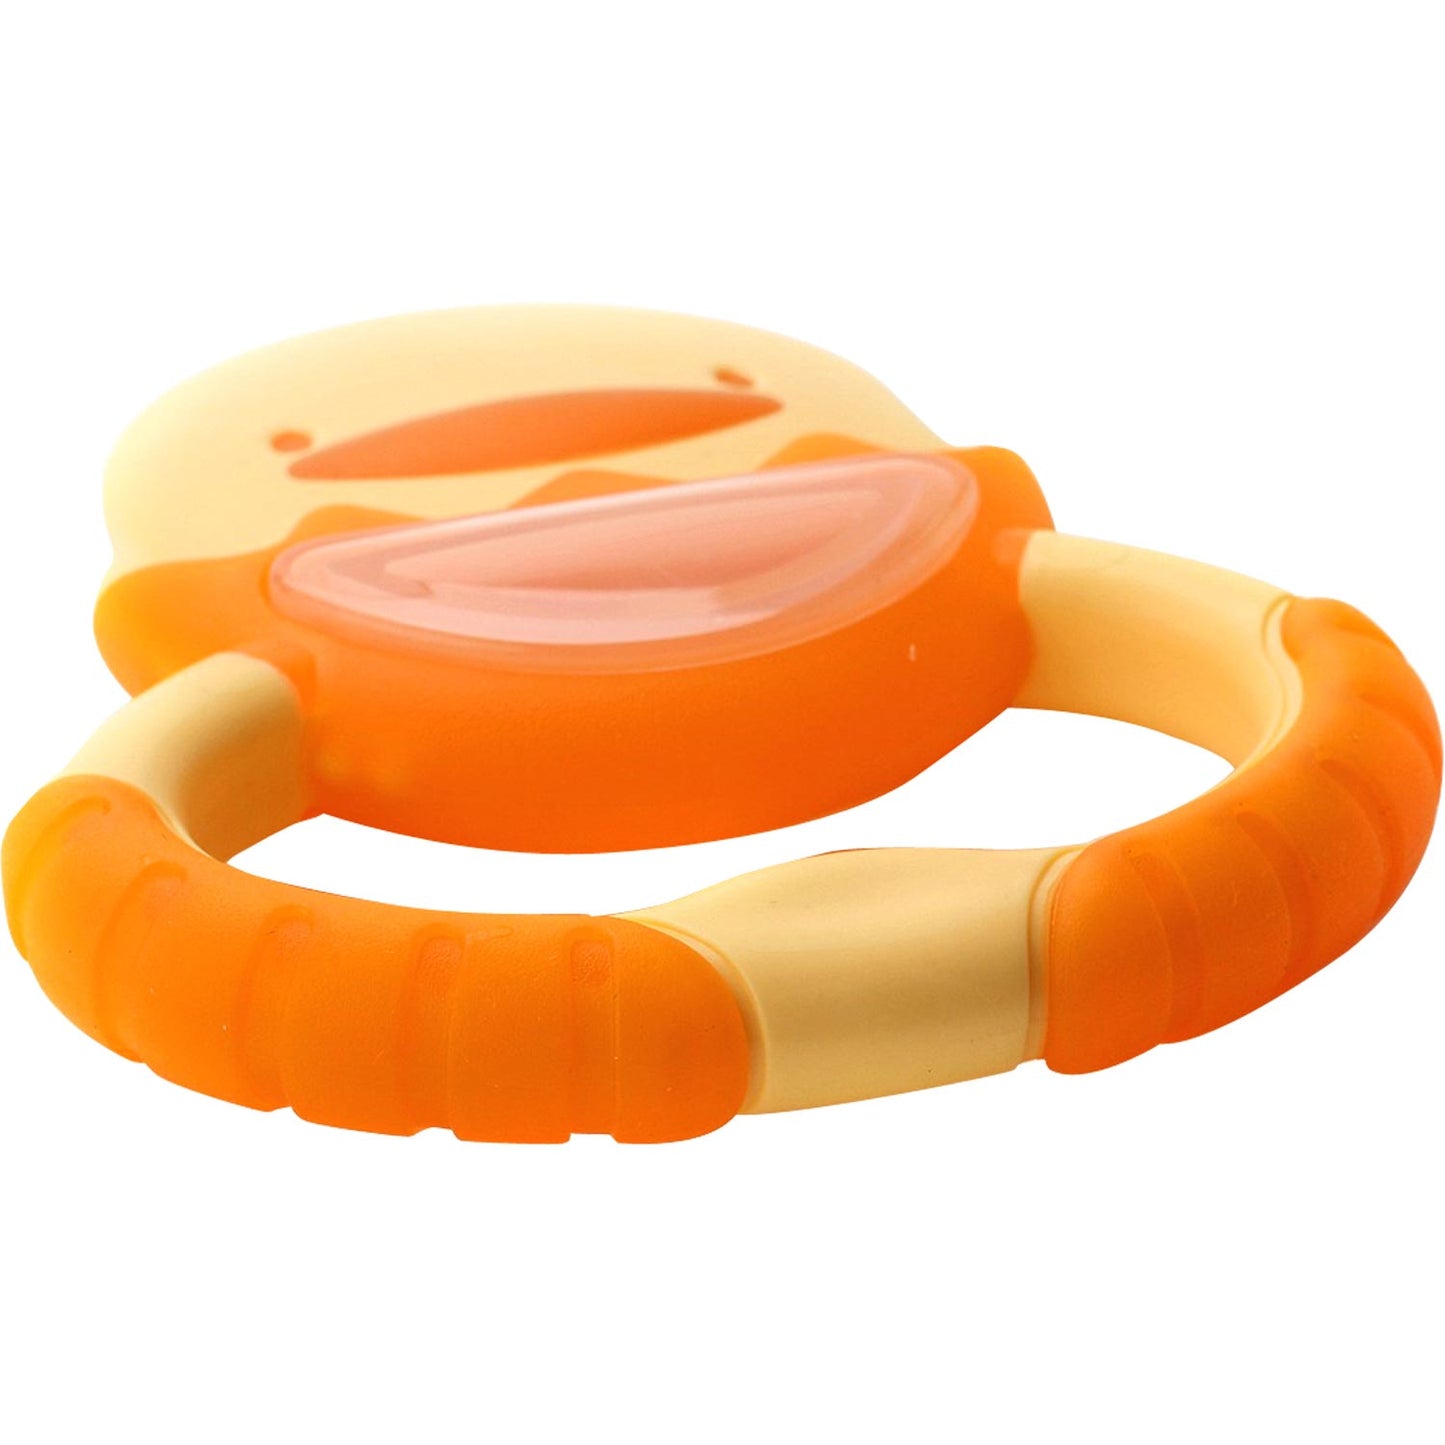 Duckling Rattle Teether(Without Packing)